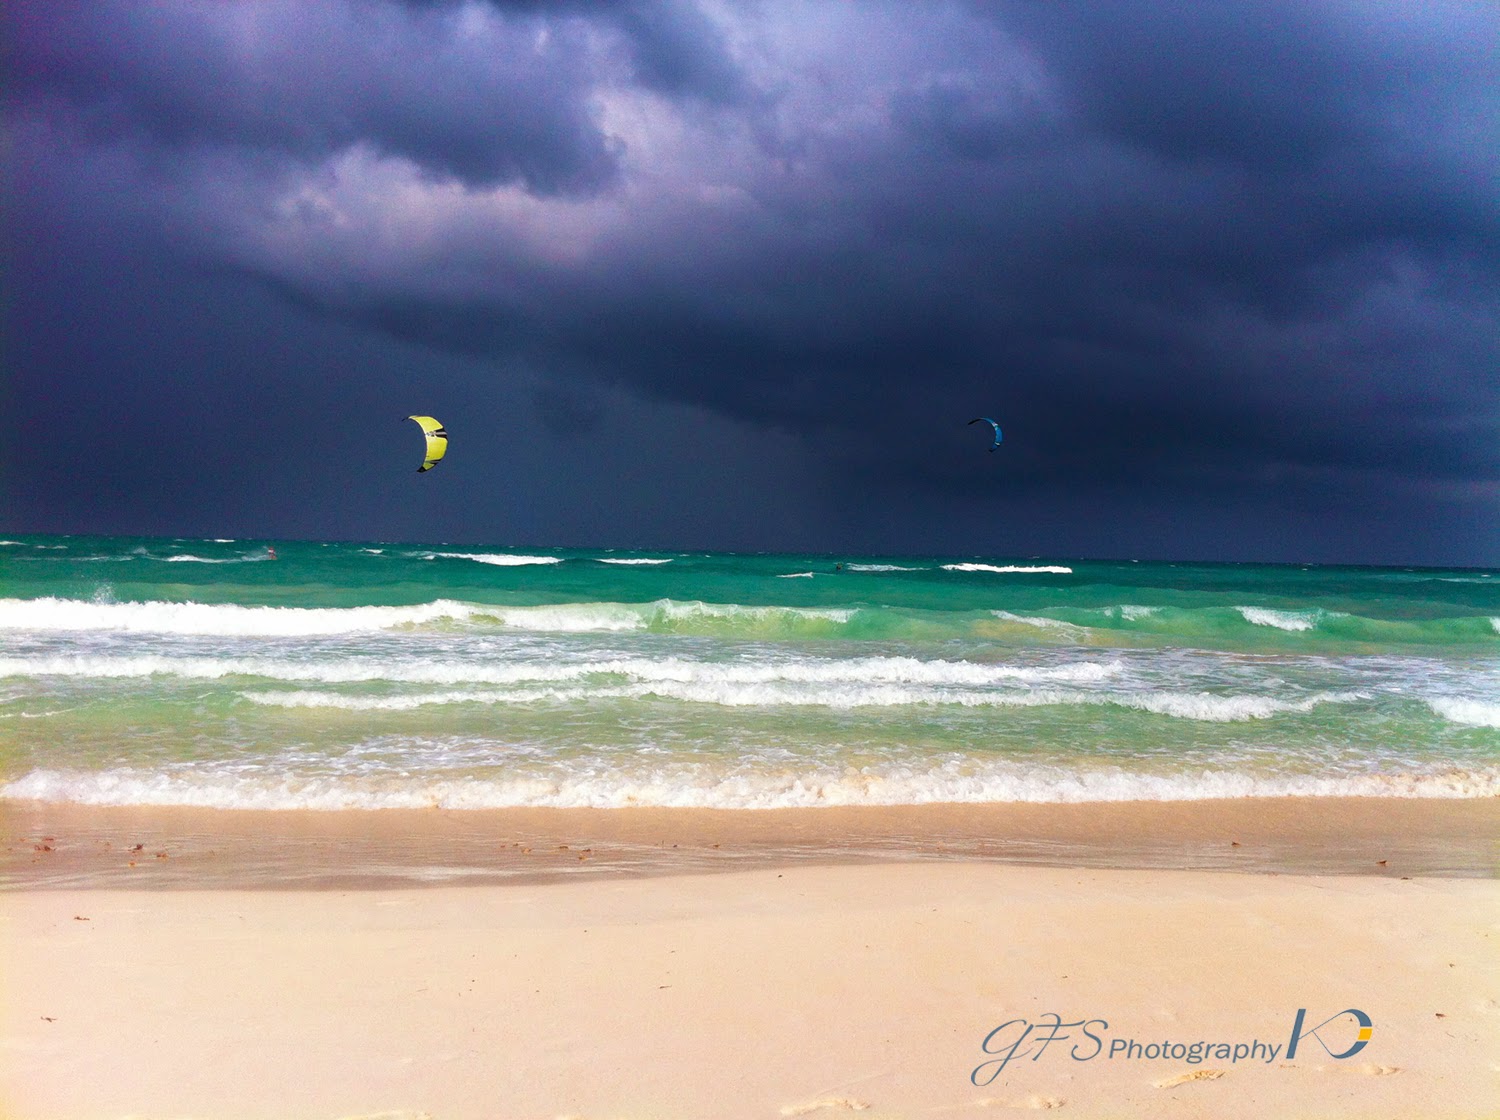 kite in the storm